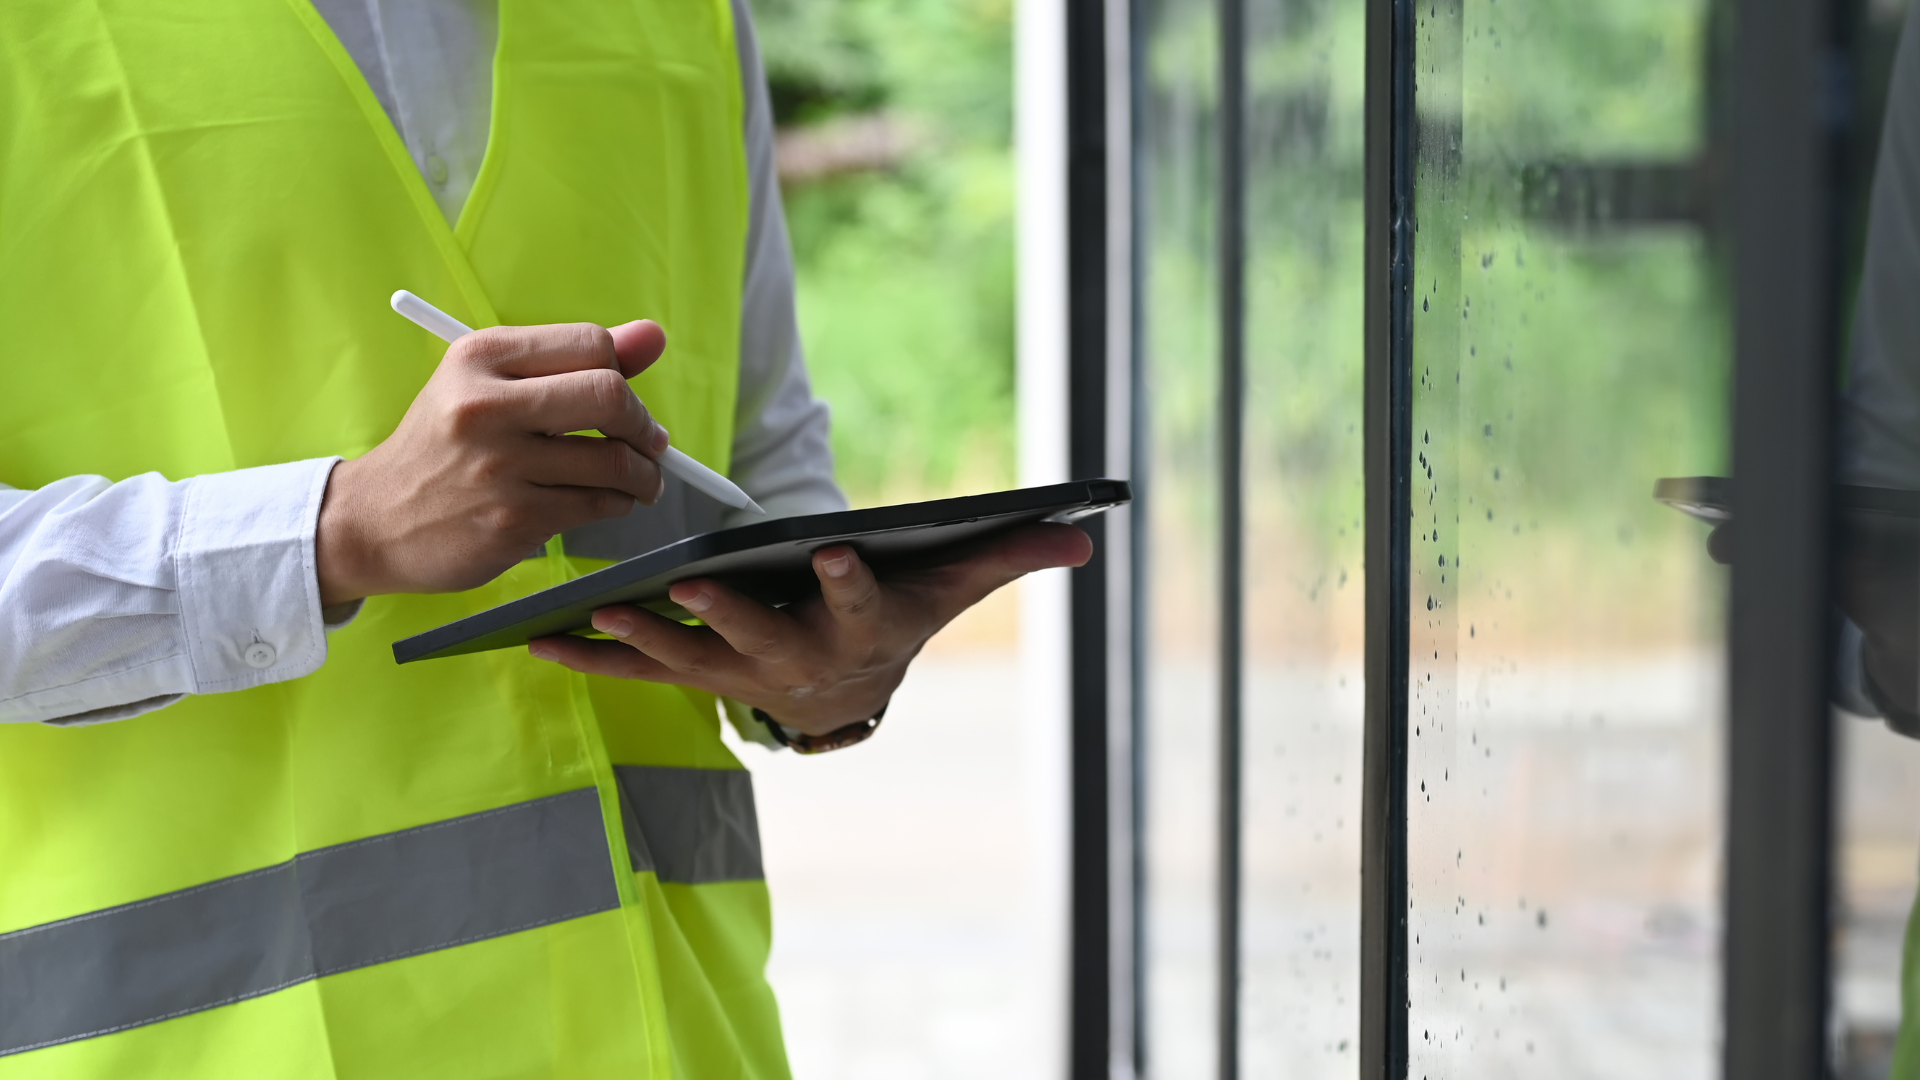 building and pest inspections can be completed by professionals who specialise in providing a building and pest report - an important aspect of the property buying process